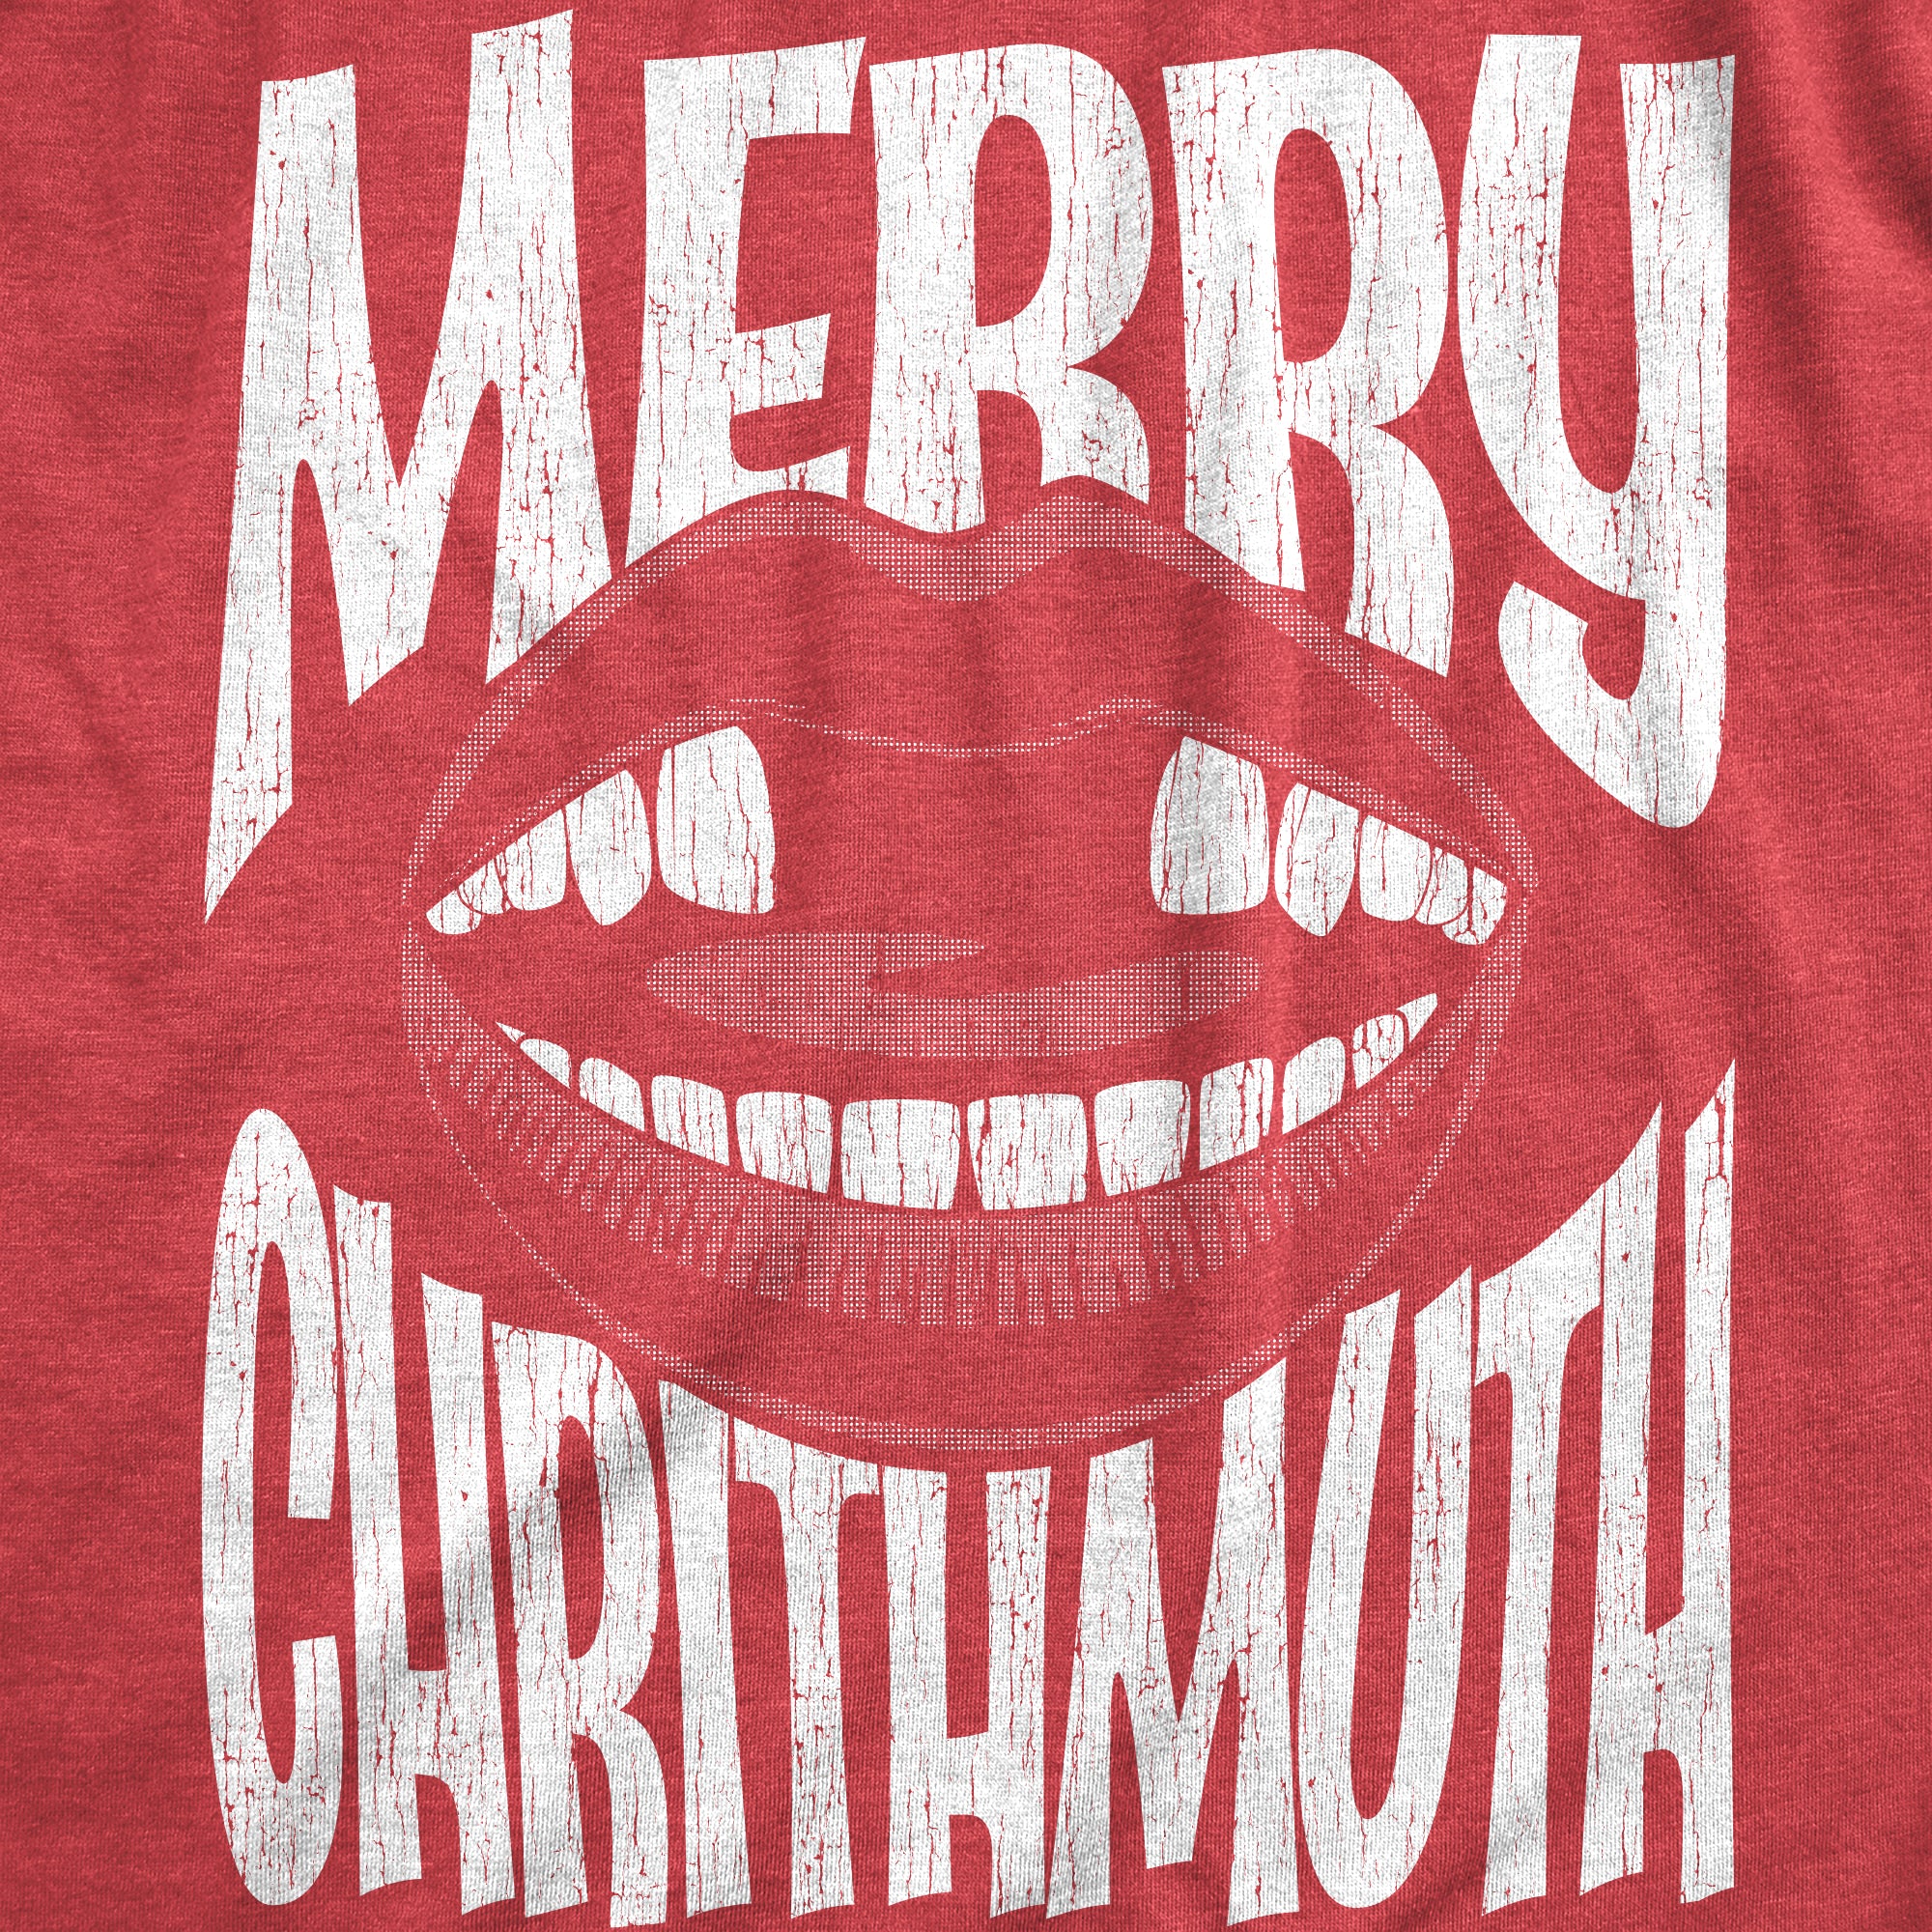 Funny Heather Red - CHRITHMUTH Merry Chrithmuth Womens T Shirt Nerdy Christmas Sarcastic Tee